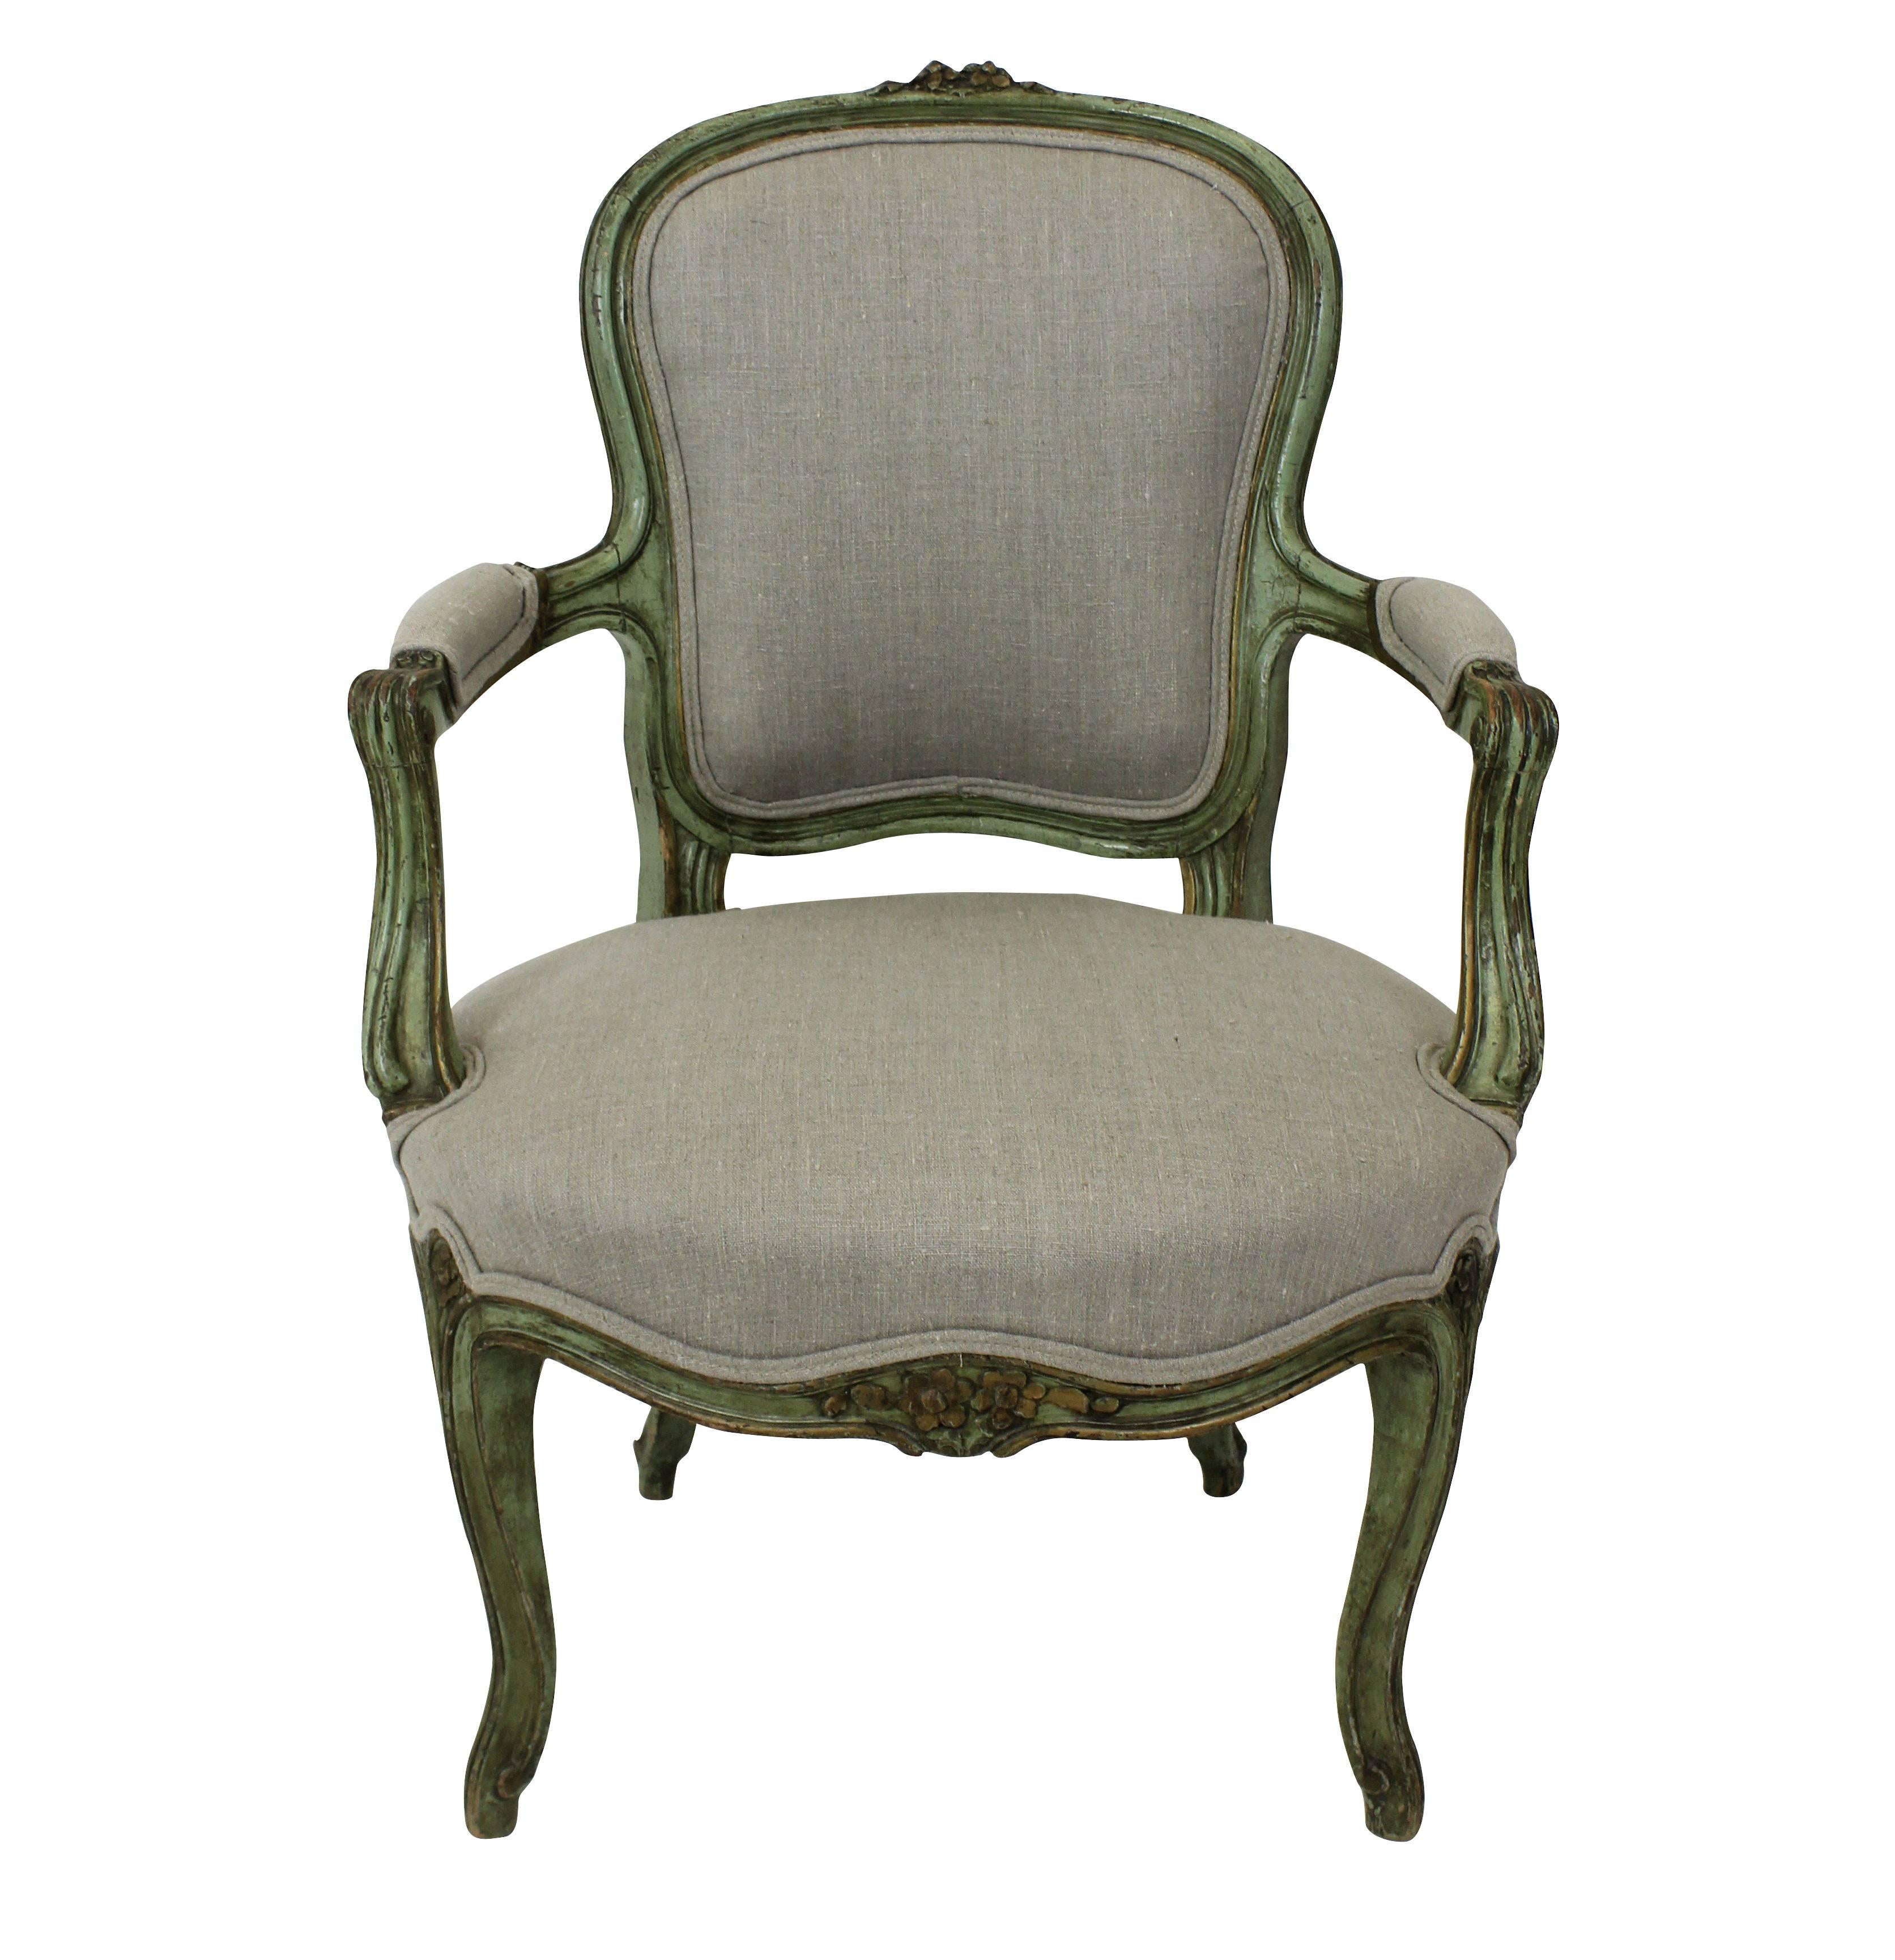 A pair of French open armchairs in their original eau de nil paint. Newly upholstered in natural linen.